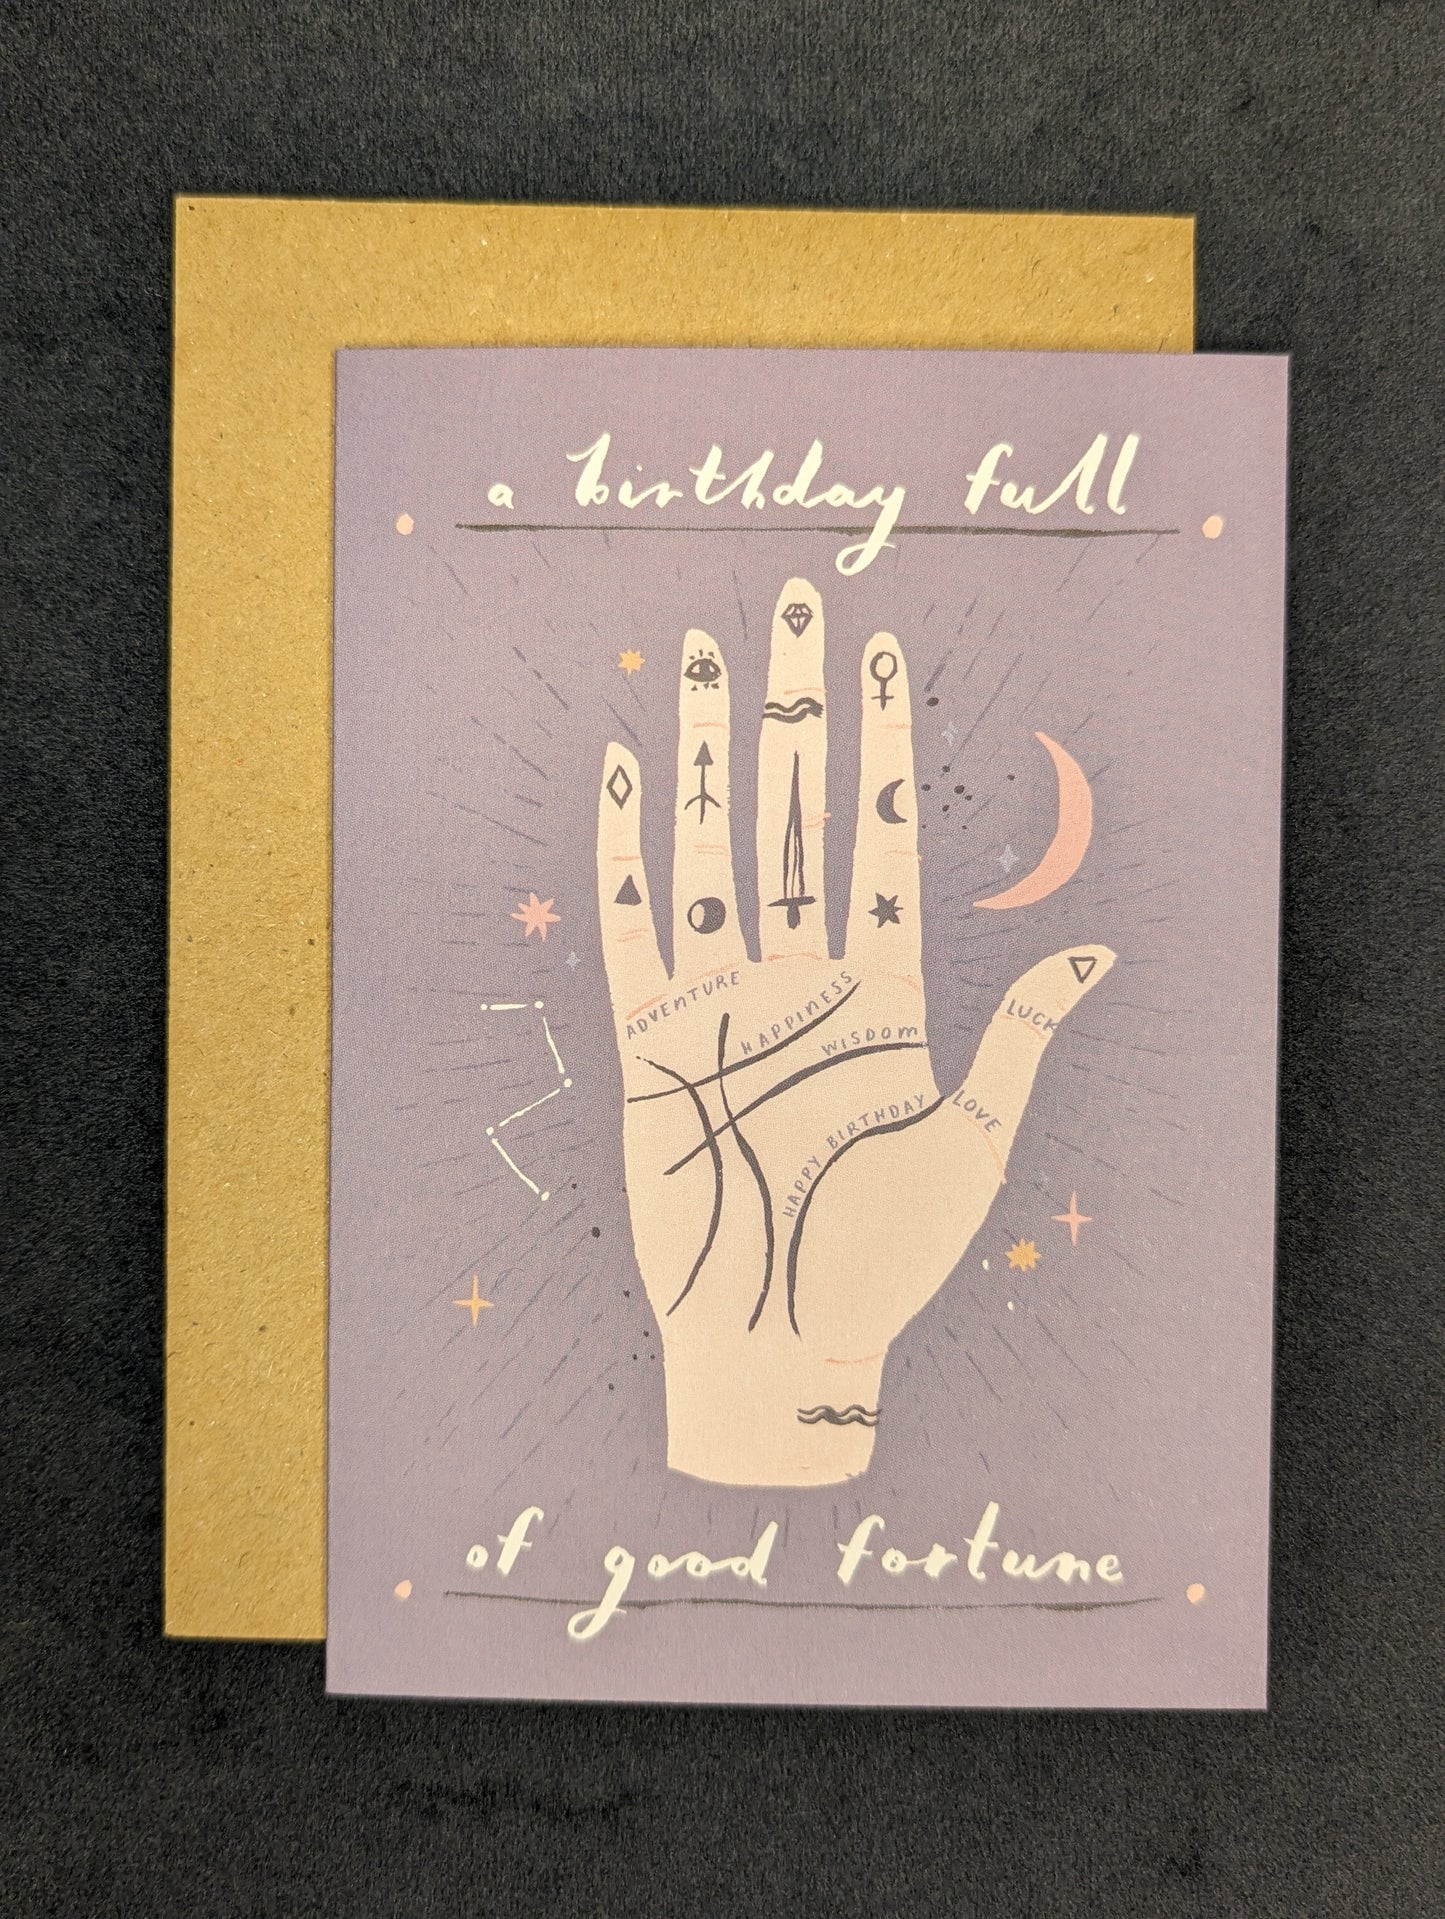 ‘A birthday full of good fortune’ Greeting Card